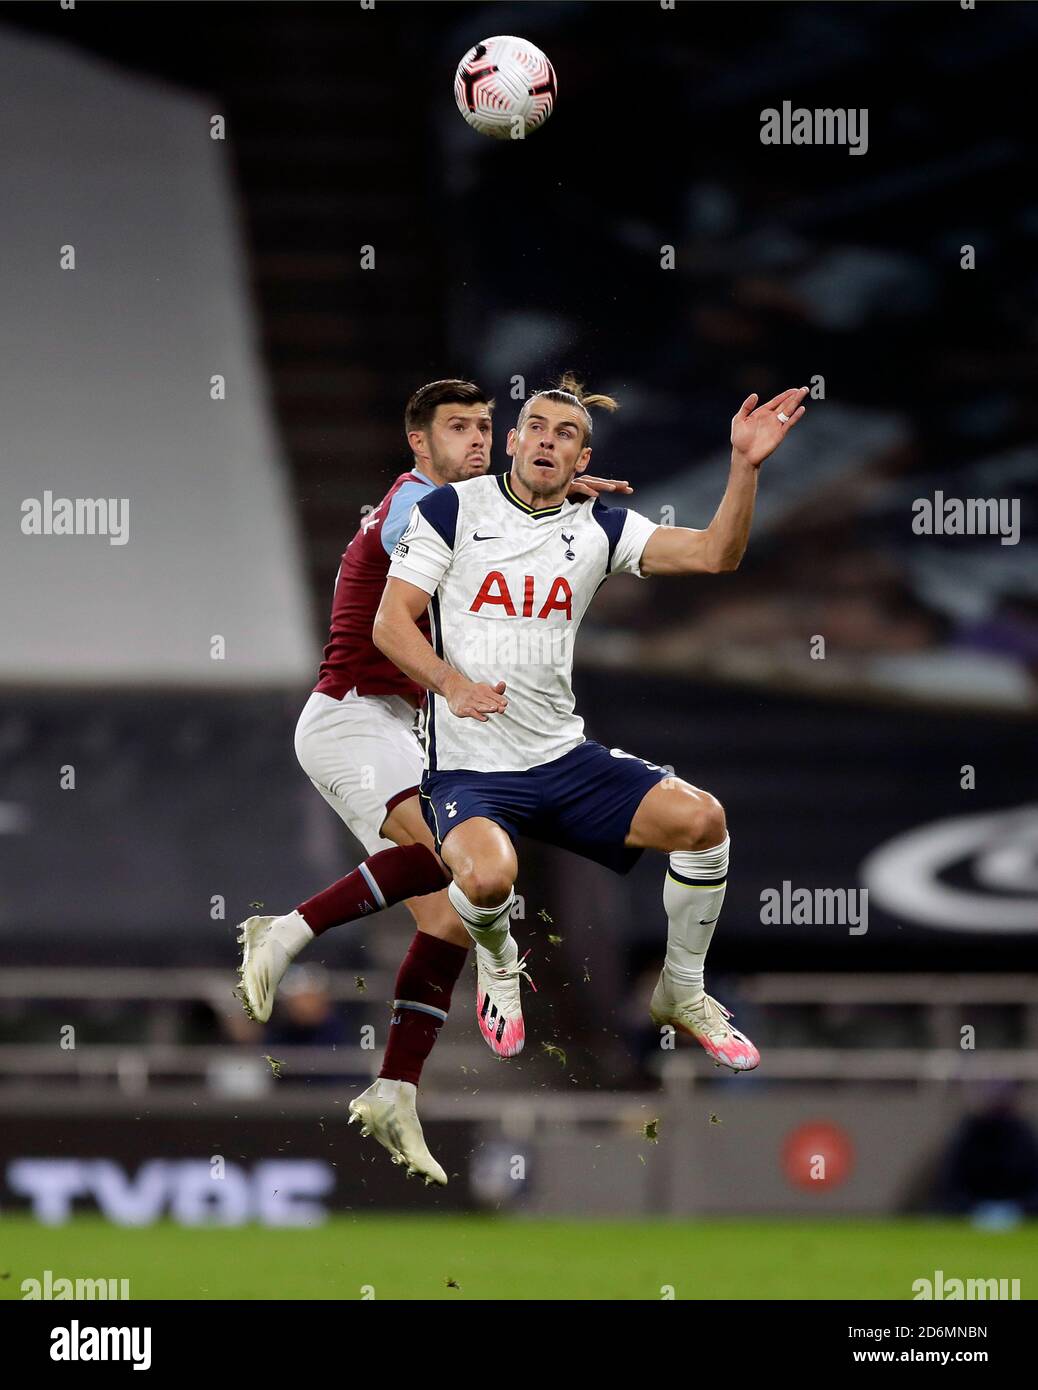 West Ham United's Aaron Cresswell (background) and Tottenham Hotspur's Gareth Bale battle for the ball in the air during the Premier League match at Tottenham Hotspur Stadium, London. Stock Photo